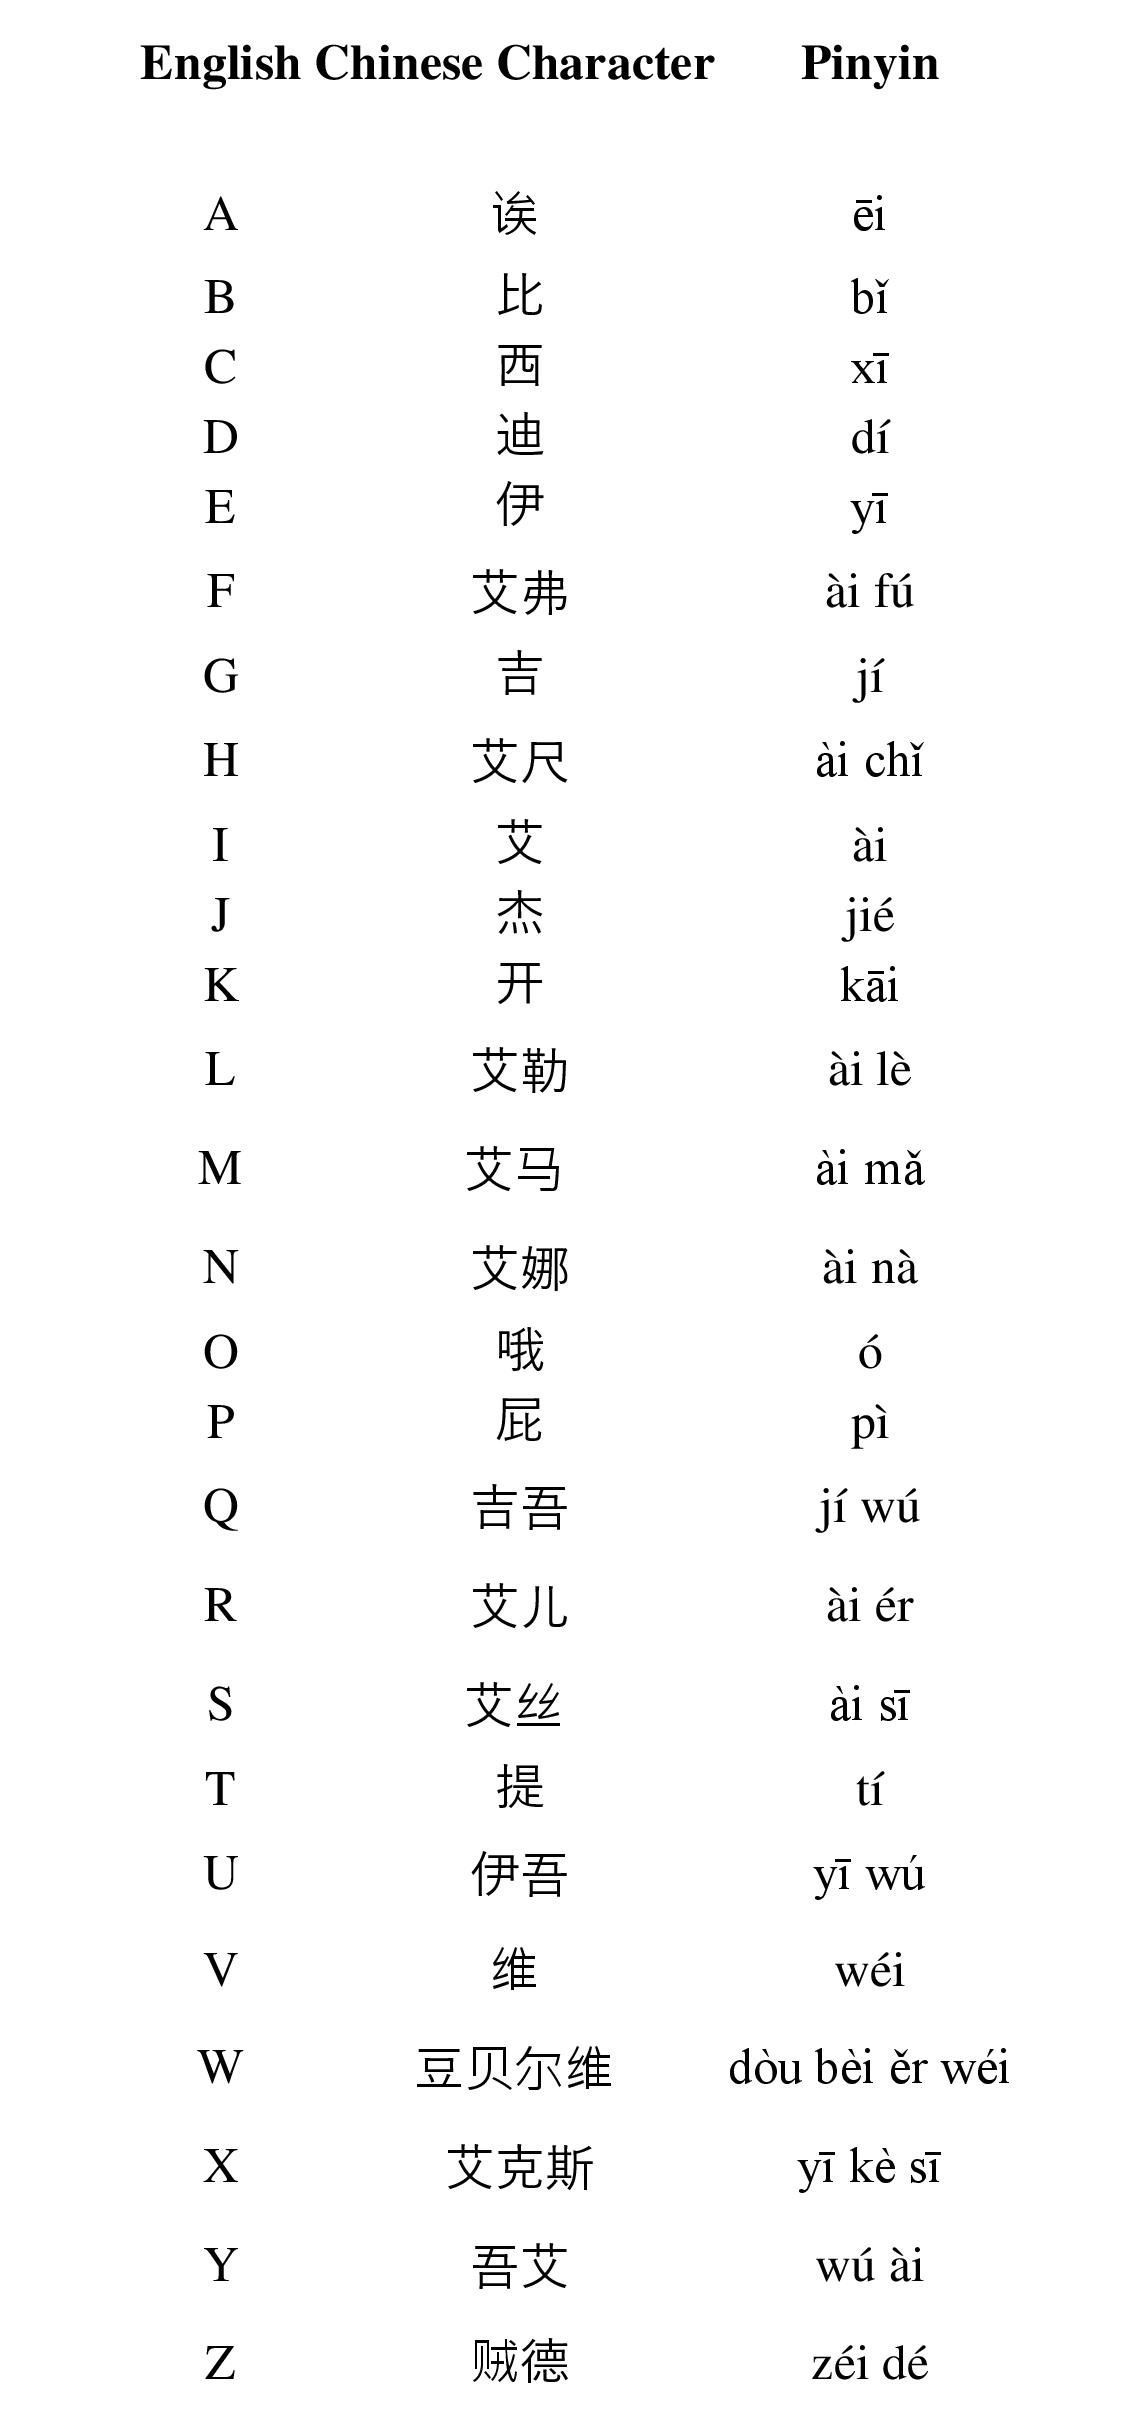 Ji stands for Good Luck)) Chinese Alphabet: There is no Chinese